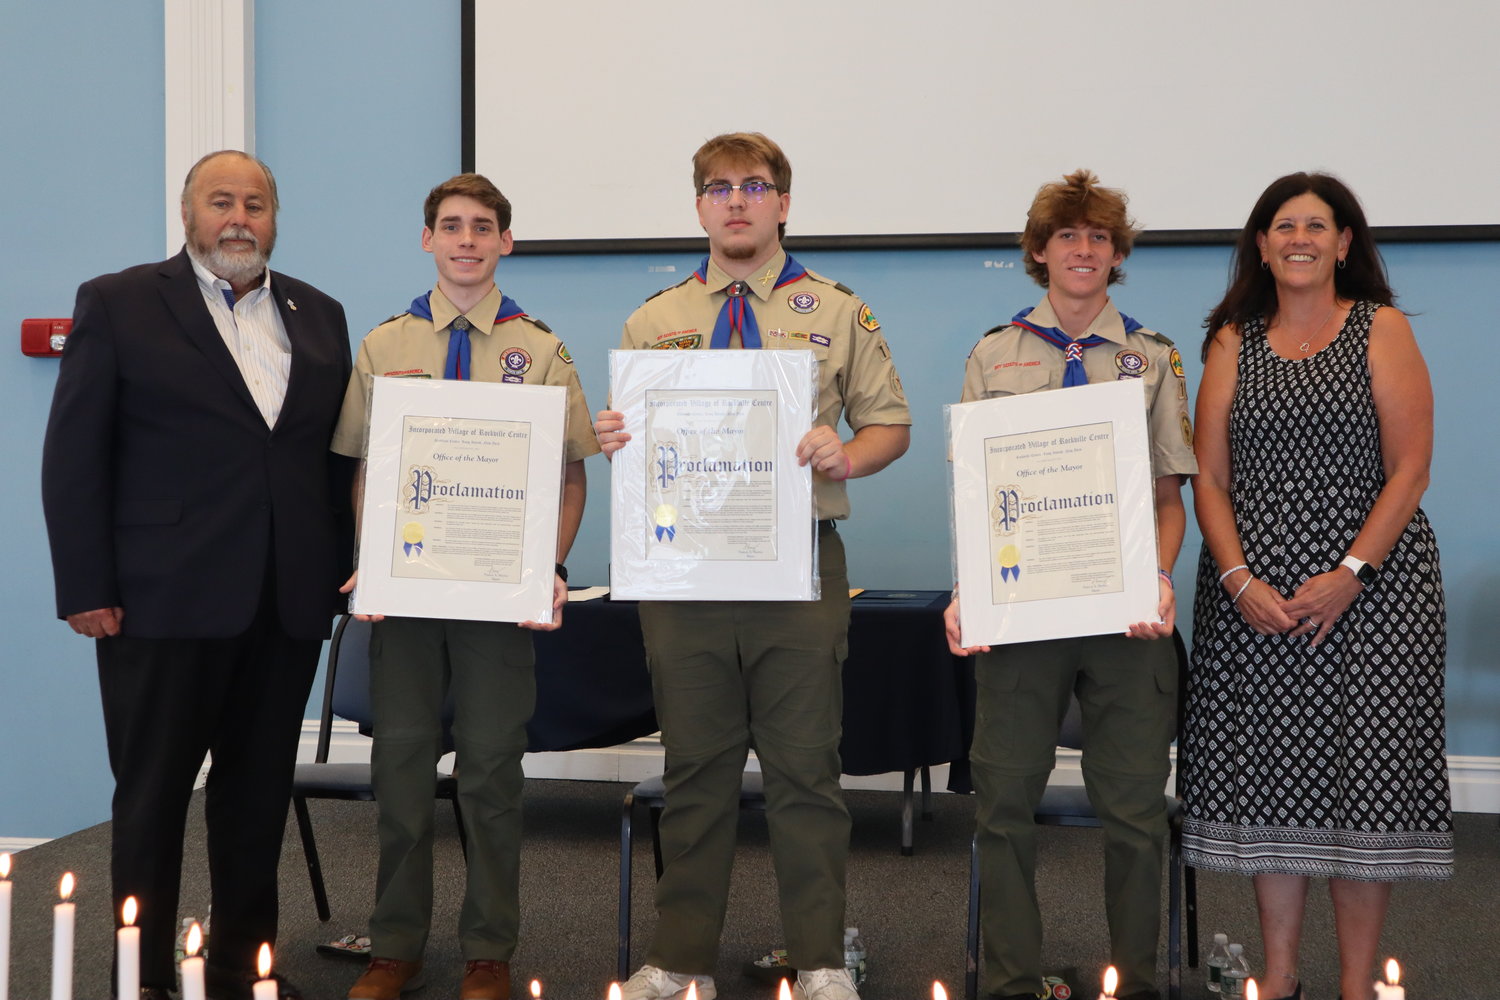 Mayor Francis Murray and Deputy Mayor Kathy Baxley presented the Eagle Scouts with proclamations in recognition of their achievement.